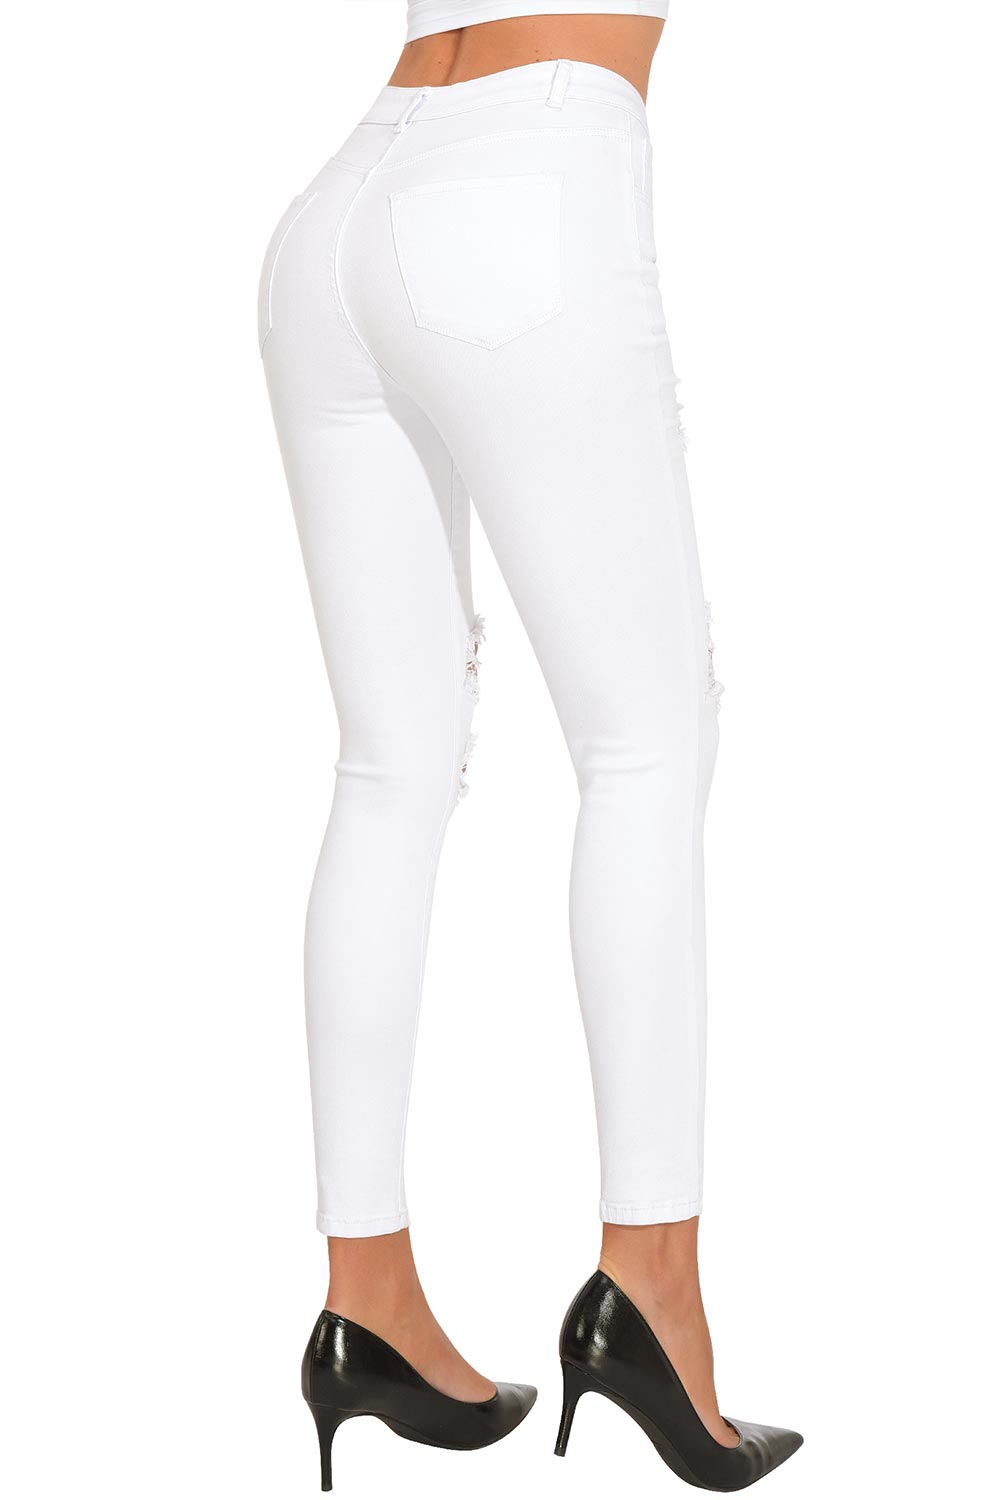 Women's Essentials Ripped Mid Rise Destroyed Skinny Jeans